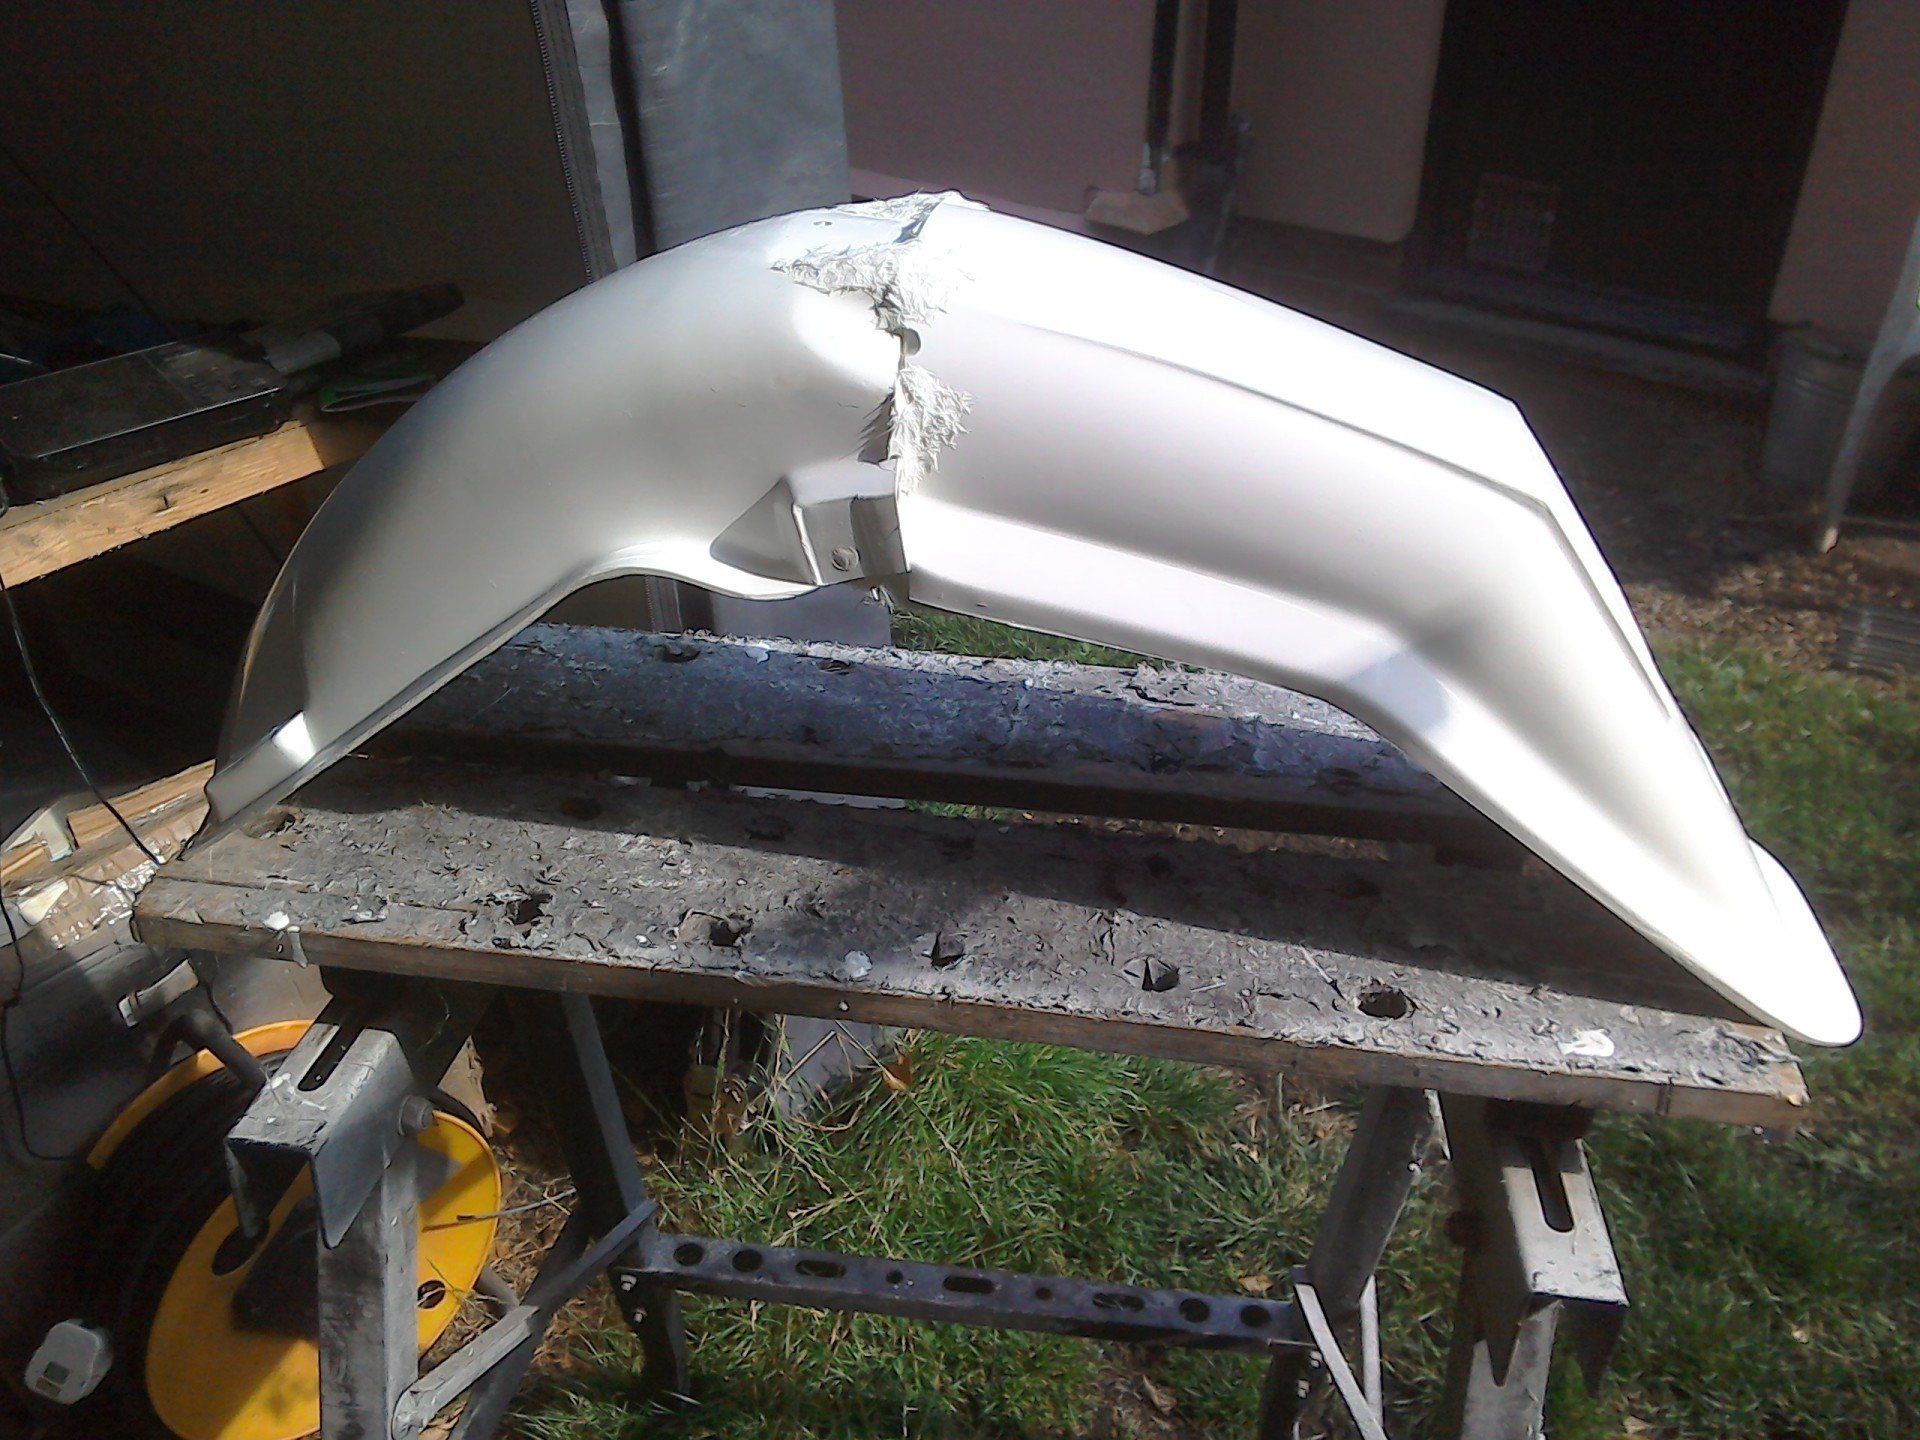 Mudguard halves permanently joined